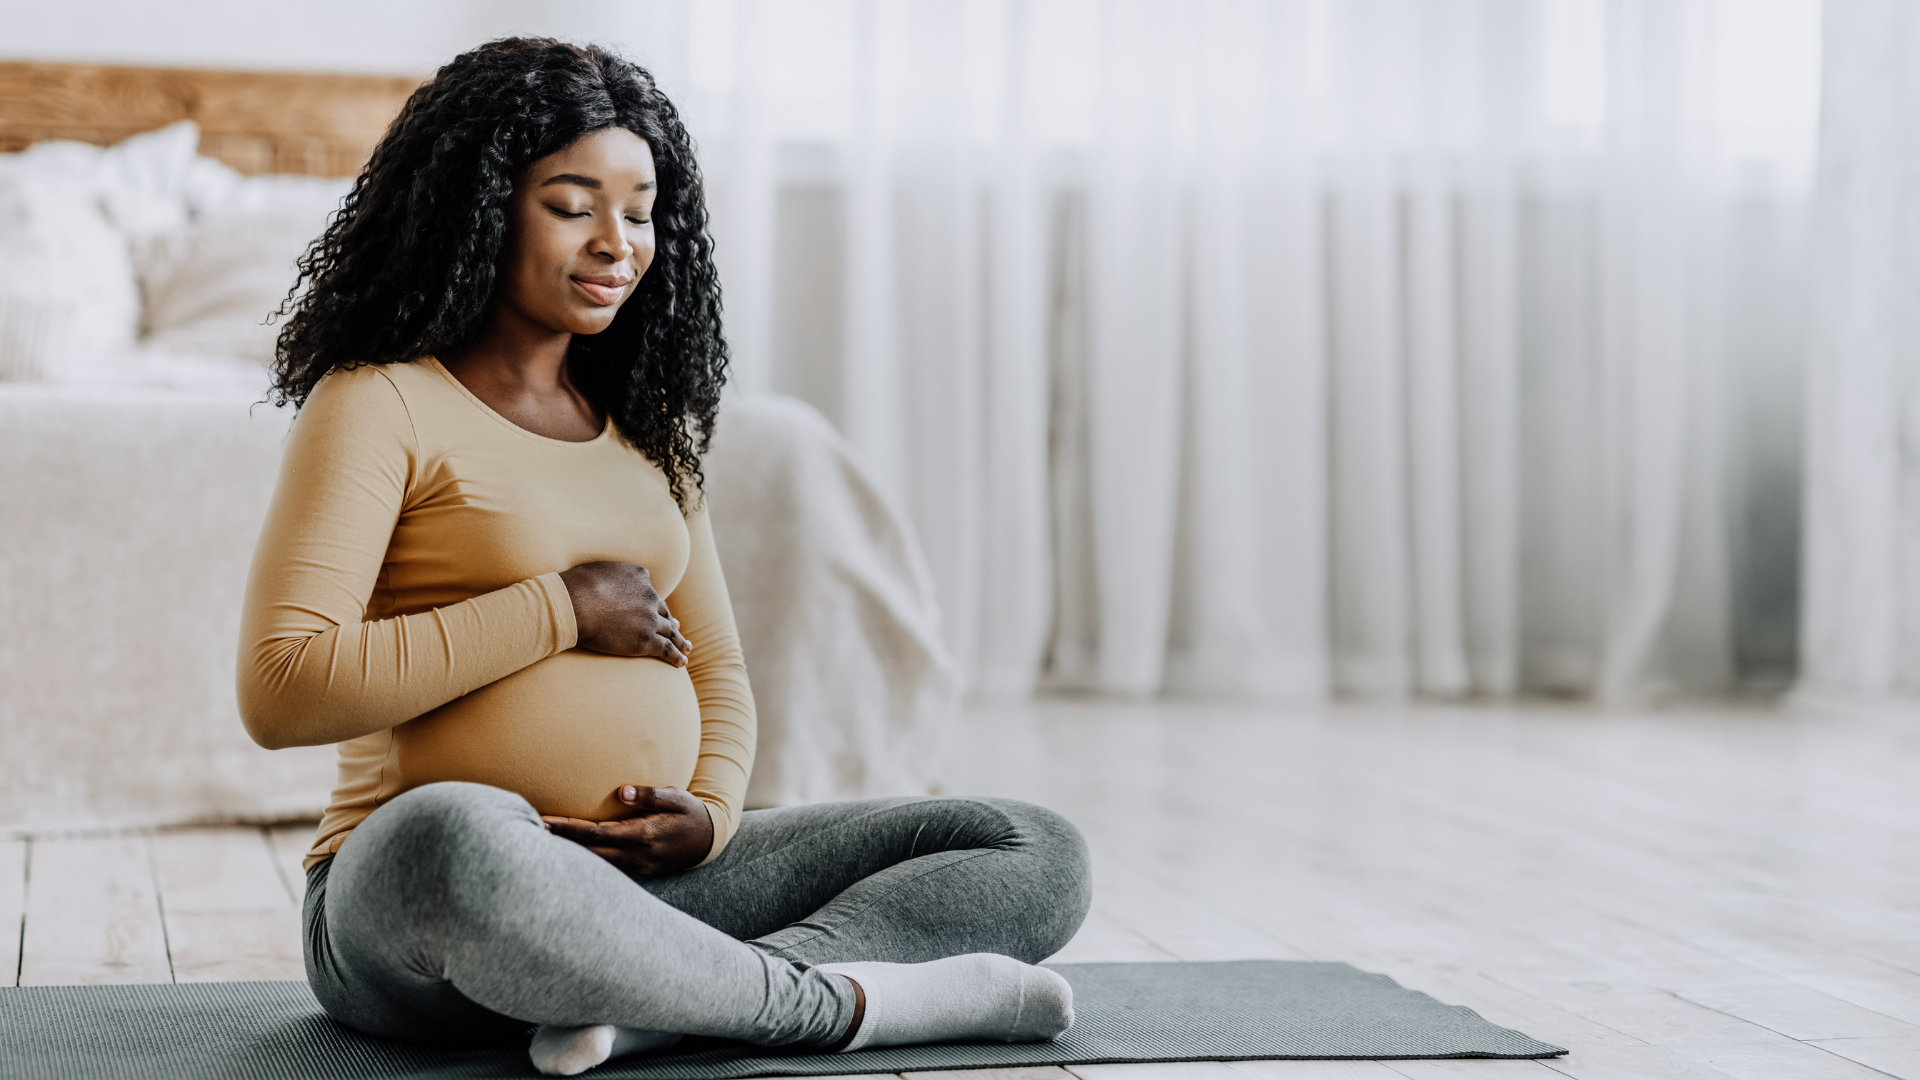 Exercise after pregnancy: How to get started - Mayo Clinic